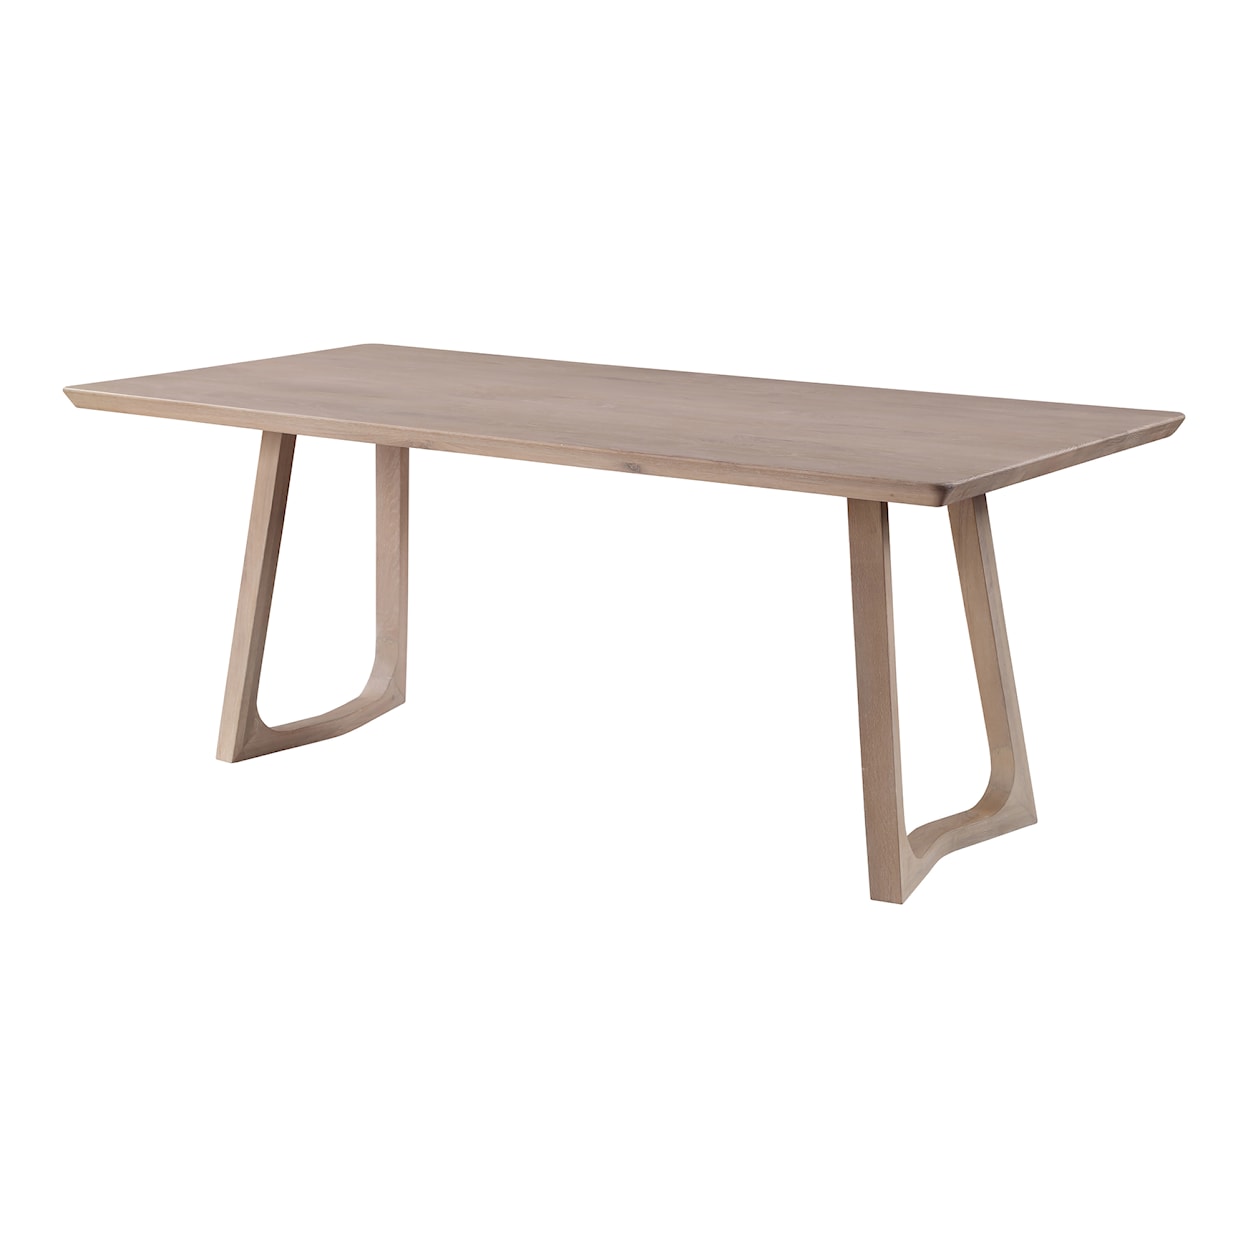 Moe's Home Collection Silas Rectanguar Solid White Oak Dining Table